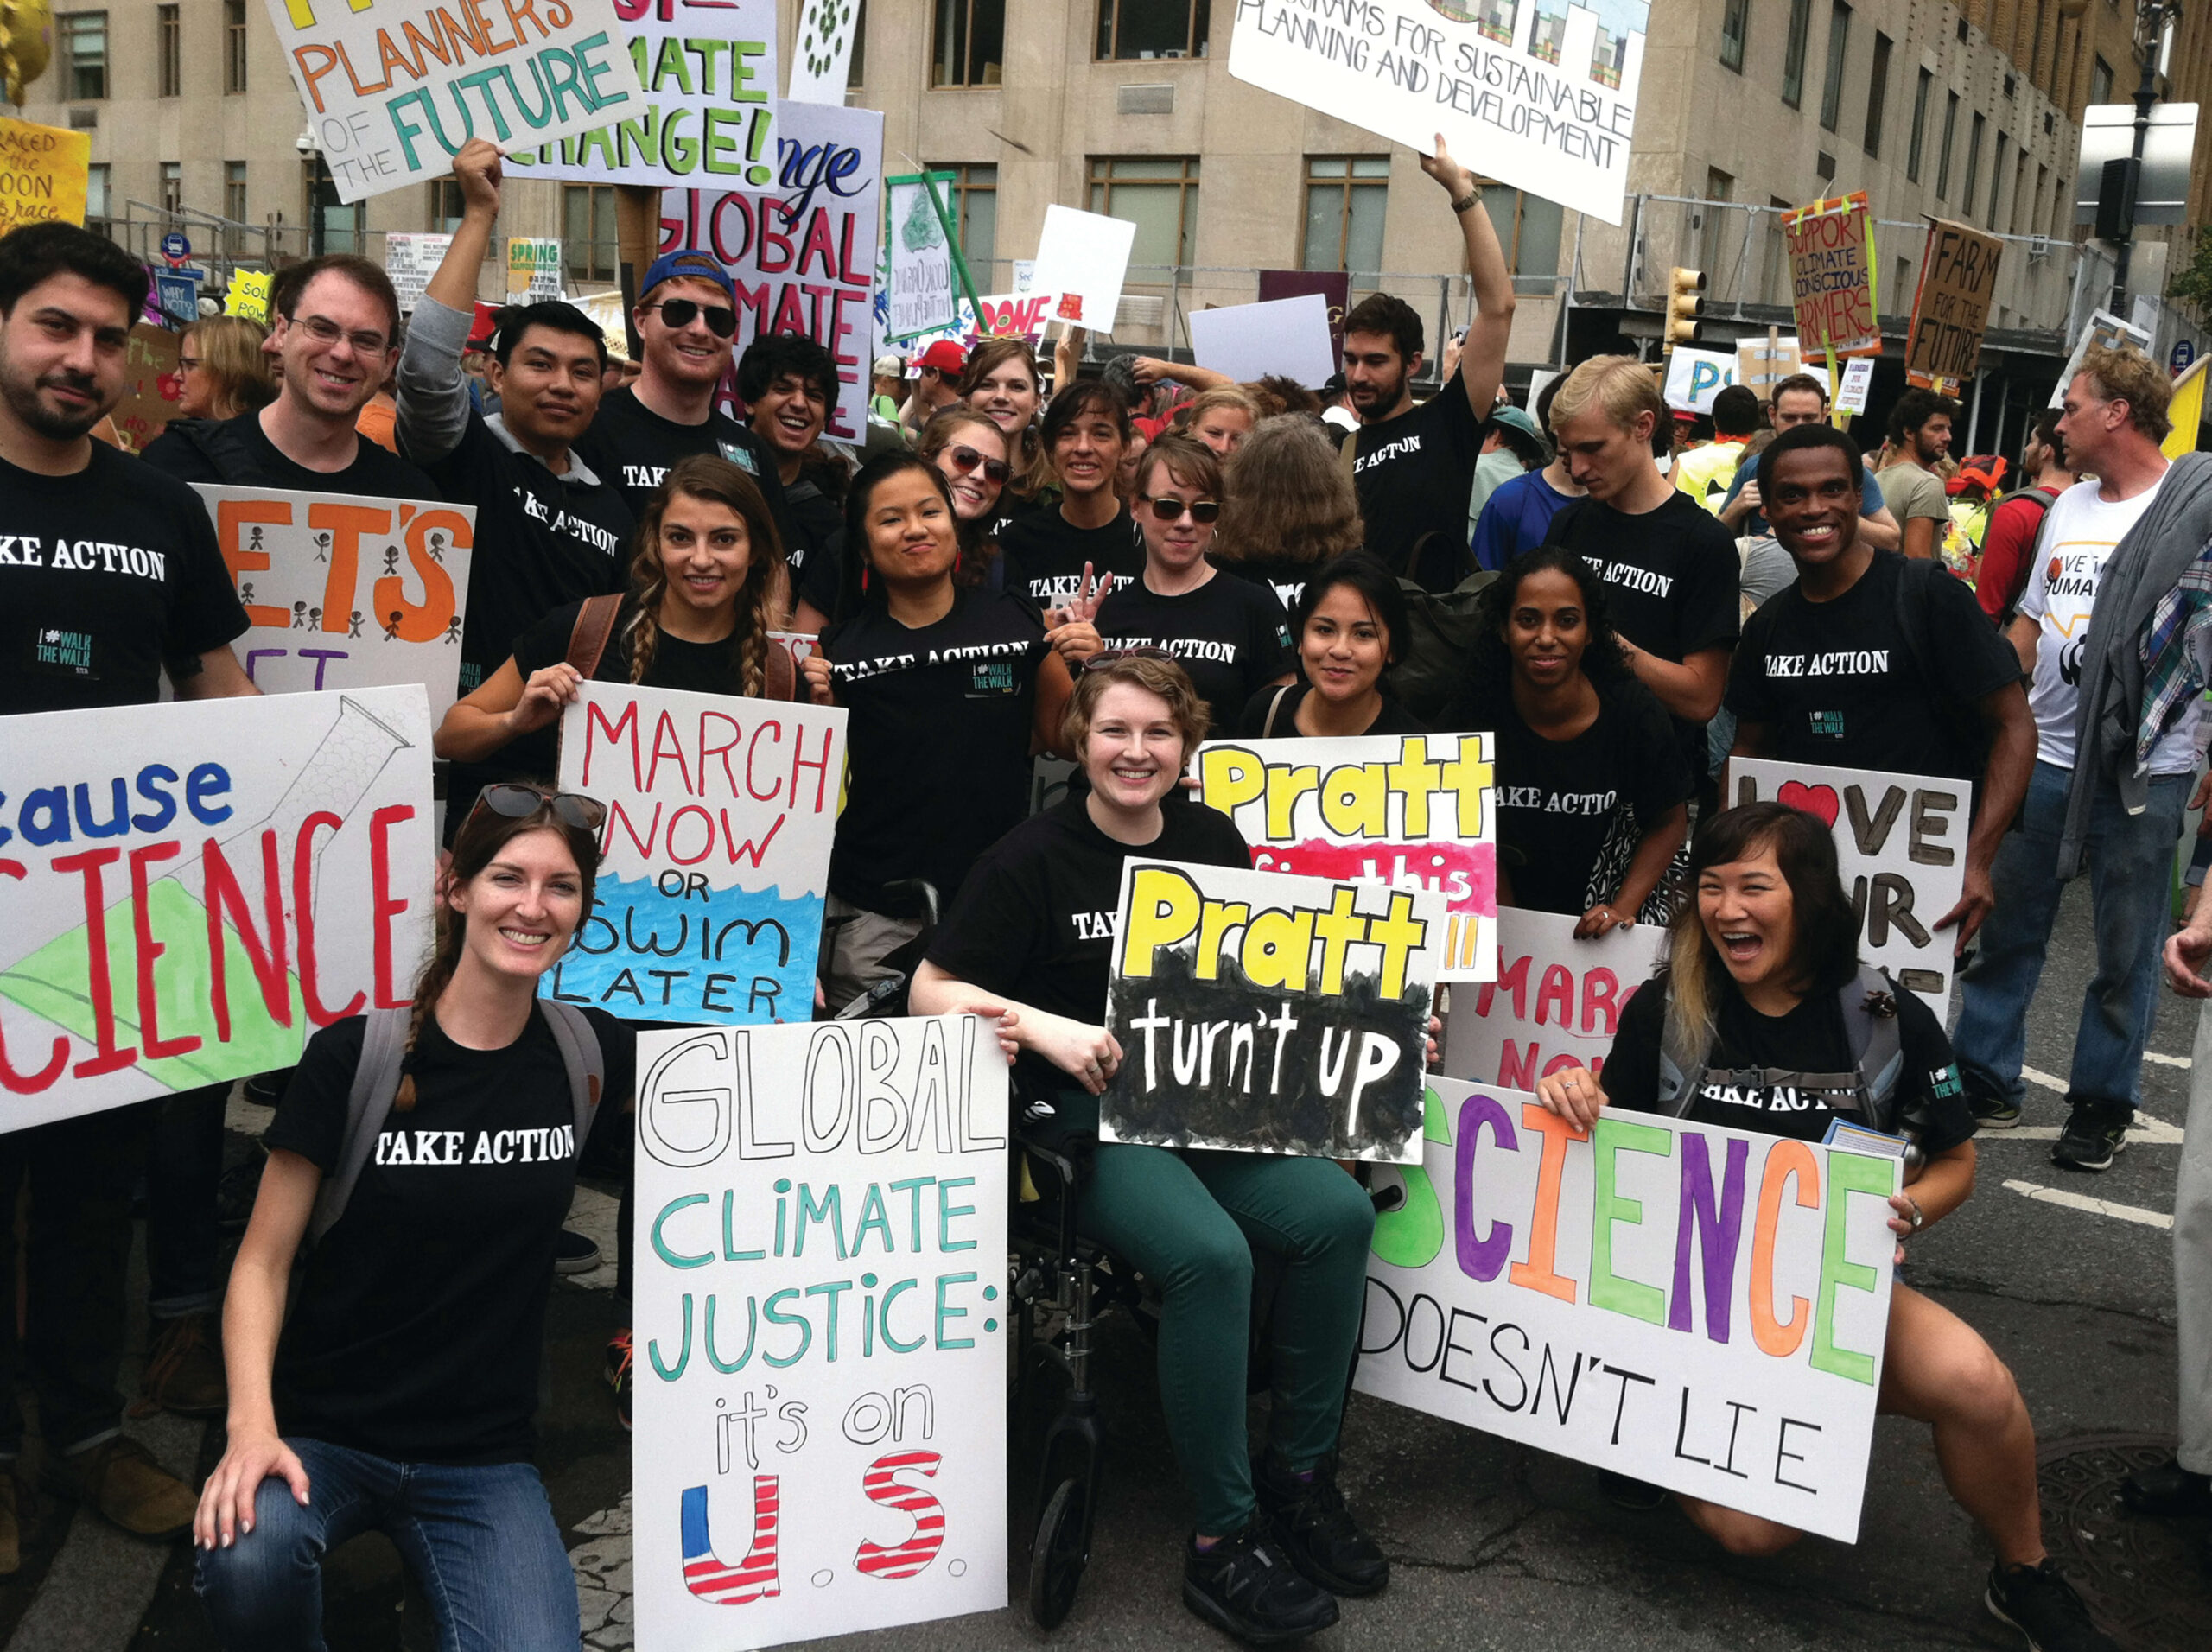 A group of Pratt student stand for a group photo during a rally in support of further action against climate change.